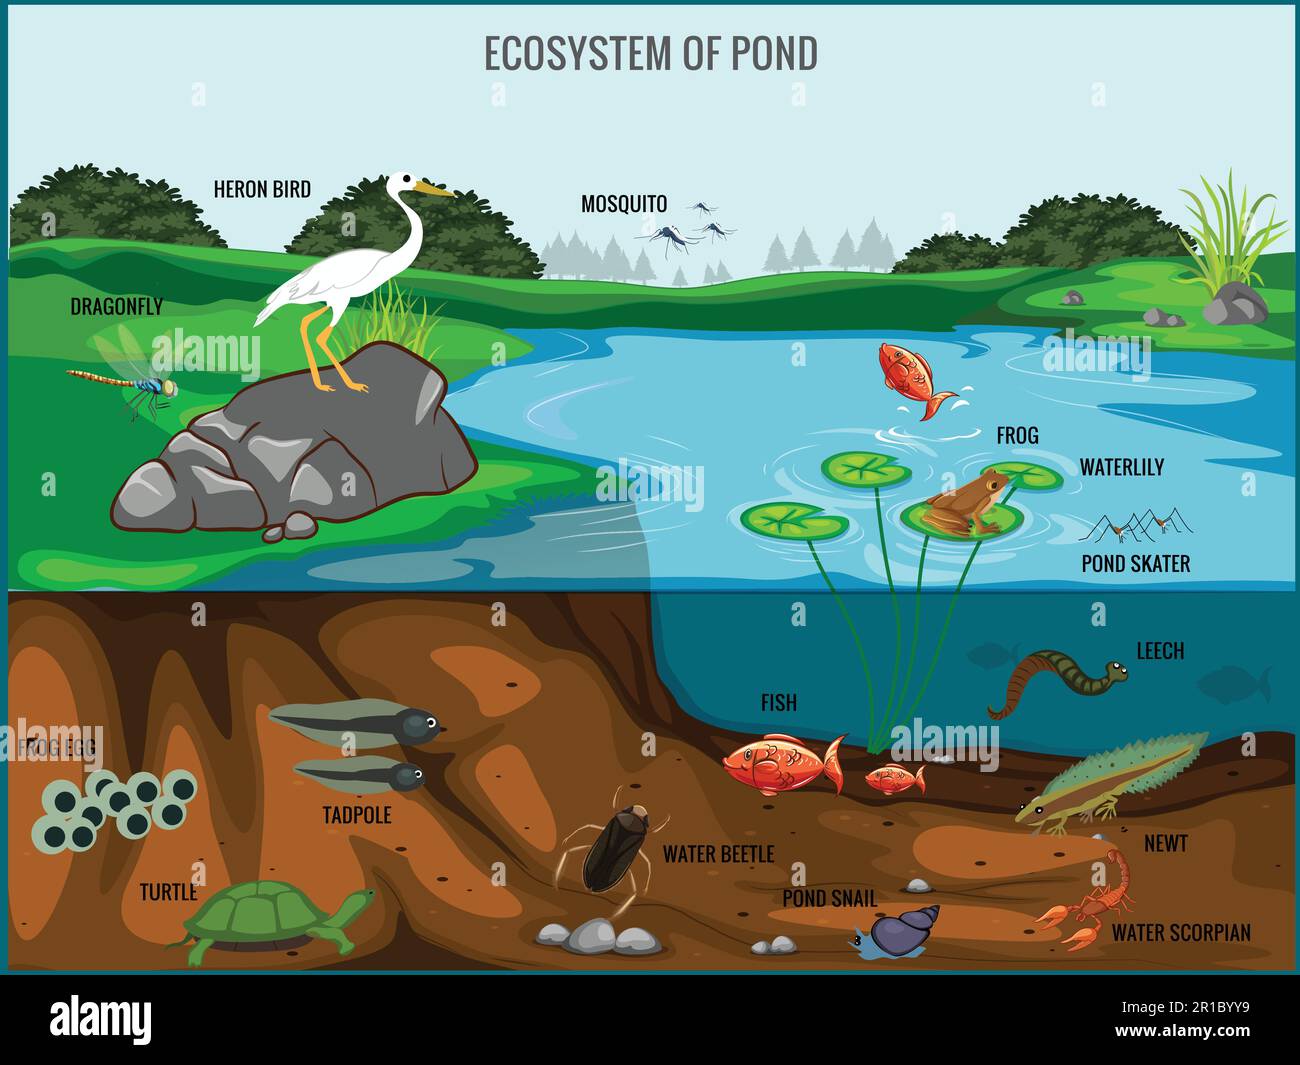 Ecosystem of pond vector illustration. Animals living in pond. Diverse inhabitants of pond fish, amphibian, leech, insects and bird in their natural h Stock Vector